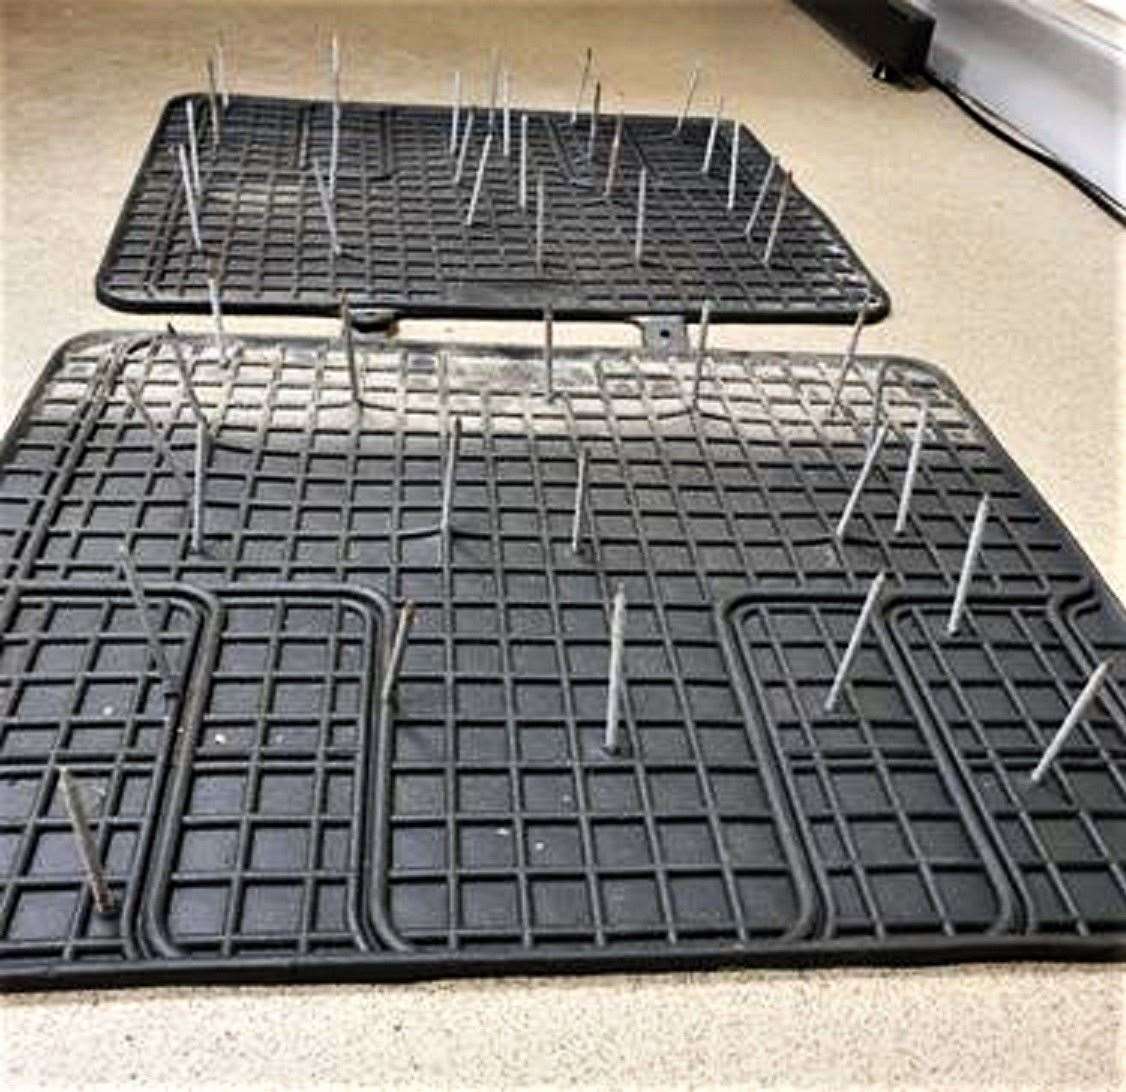 Two car mats with nails embedded were found on the A99 near Thrumster. Picture: Police Scotland